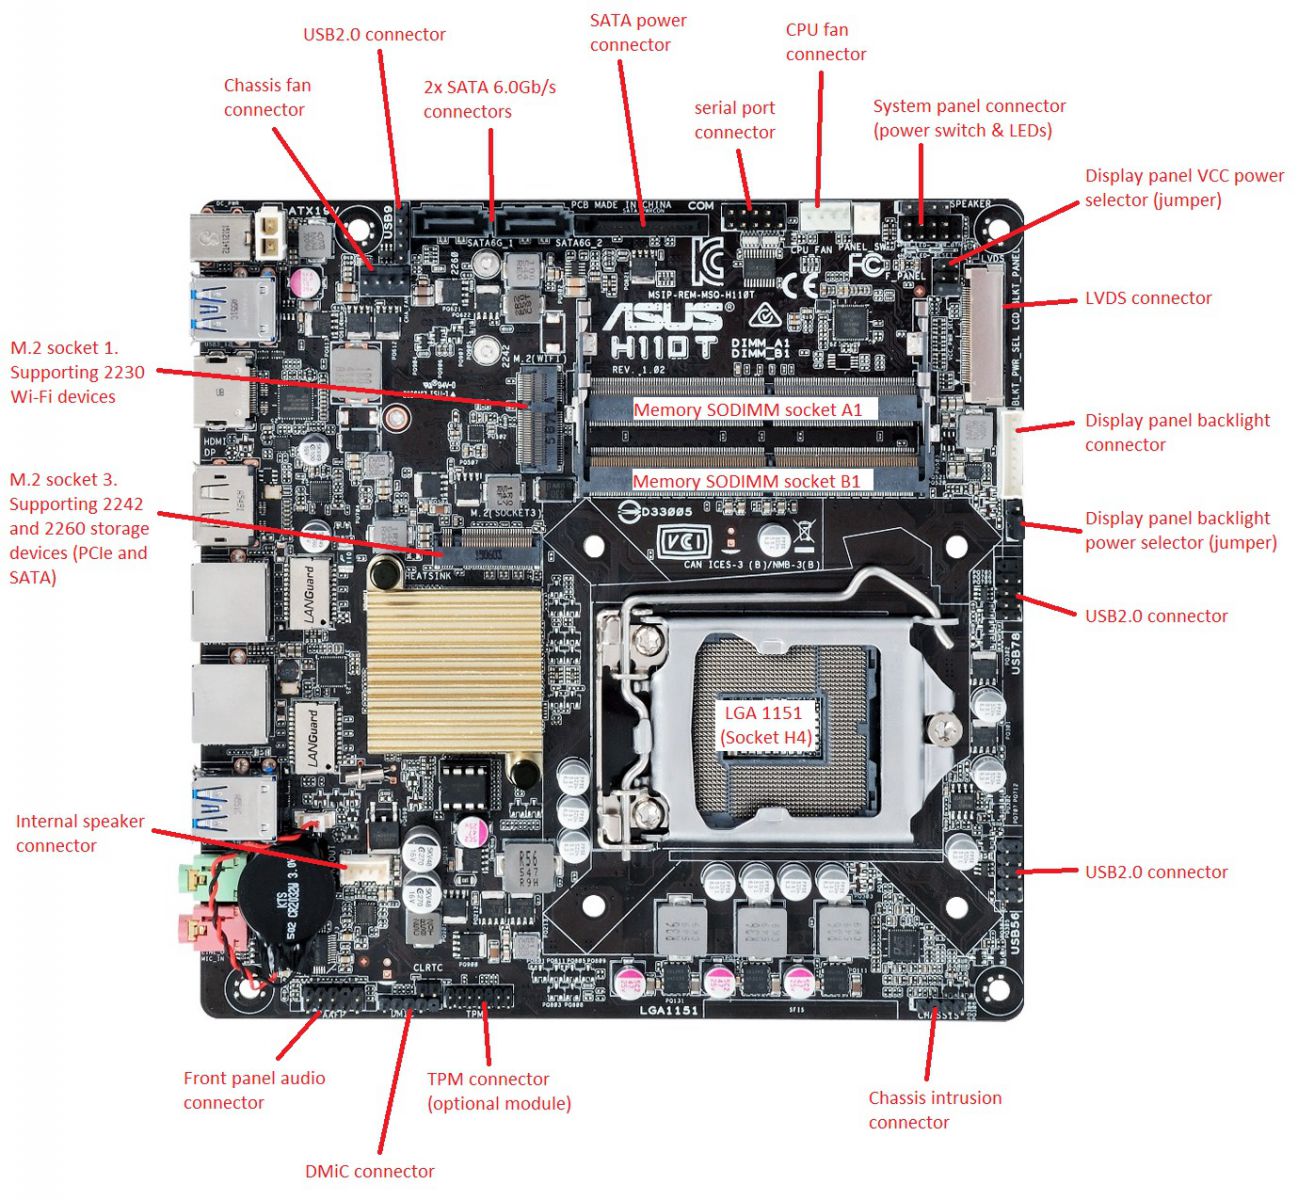 BOAMOT-483 - Stone / Asus H110T - Motherboard Specification, Layout and ...